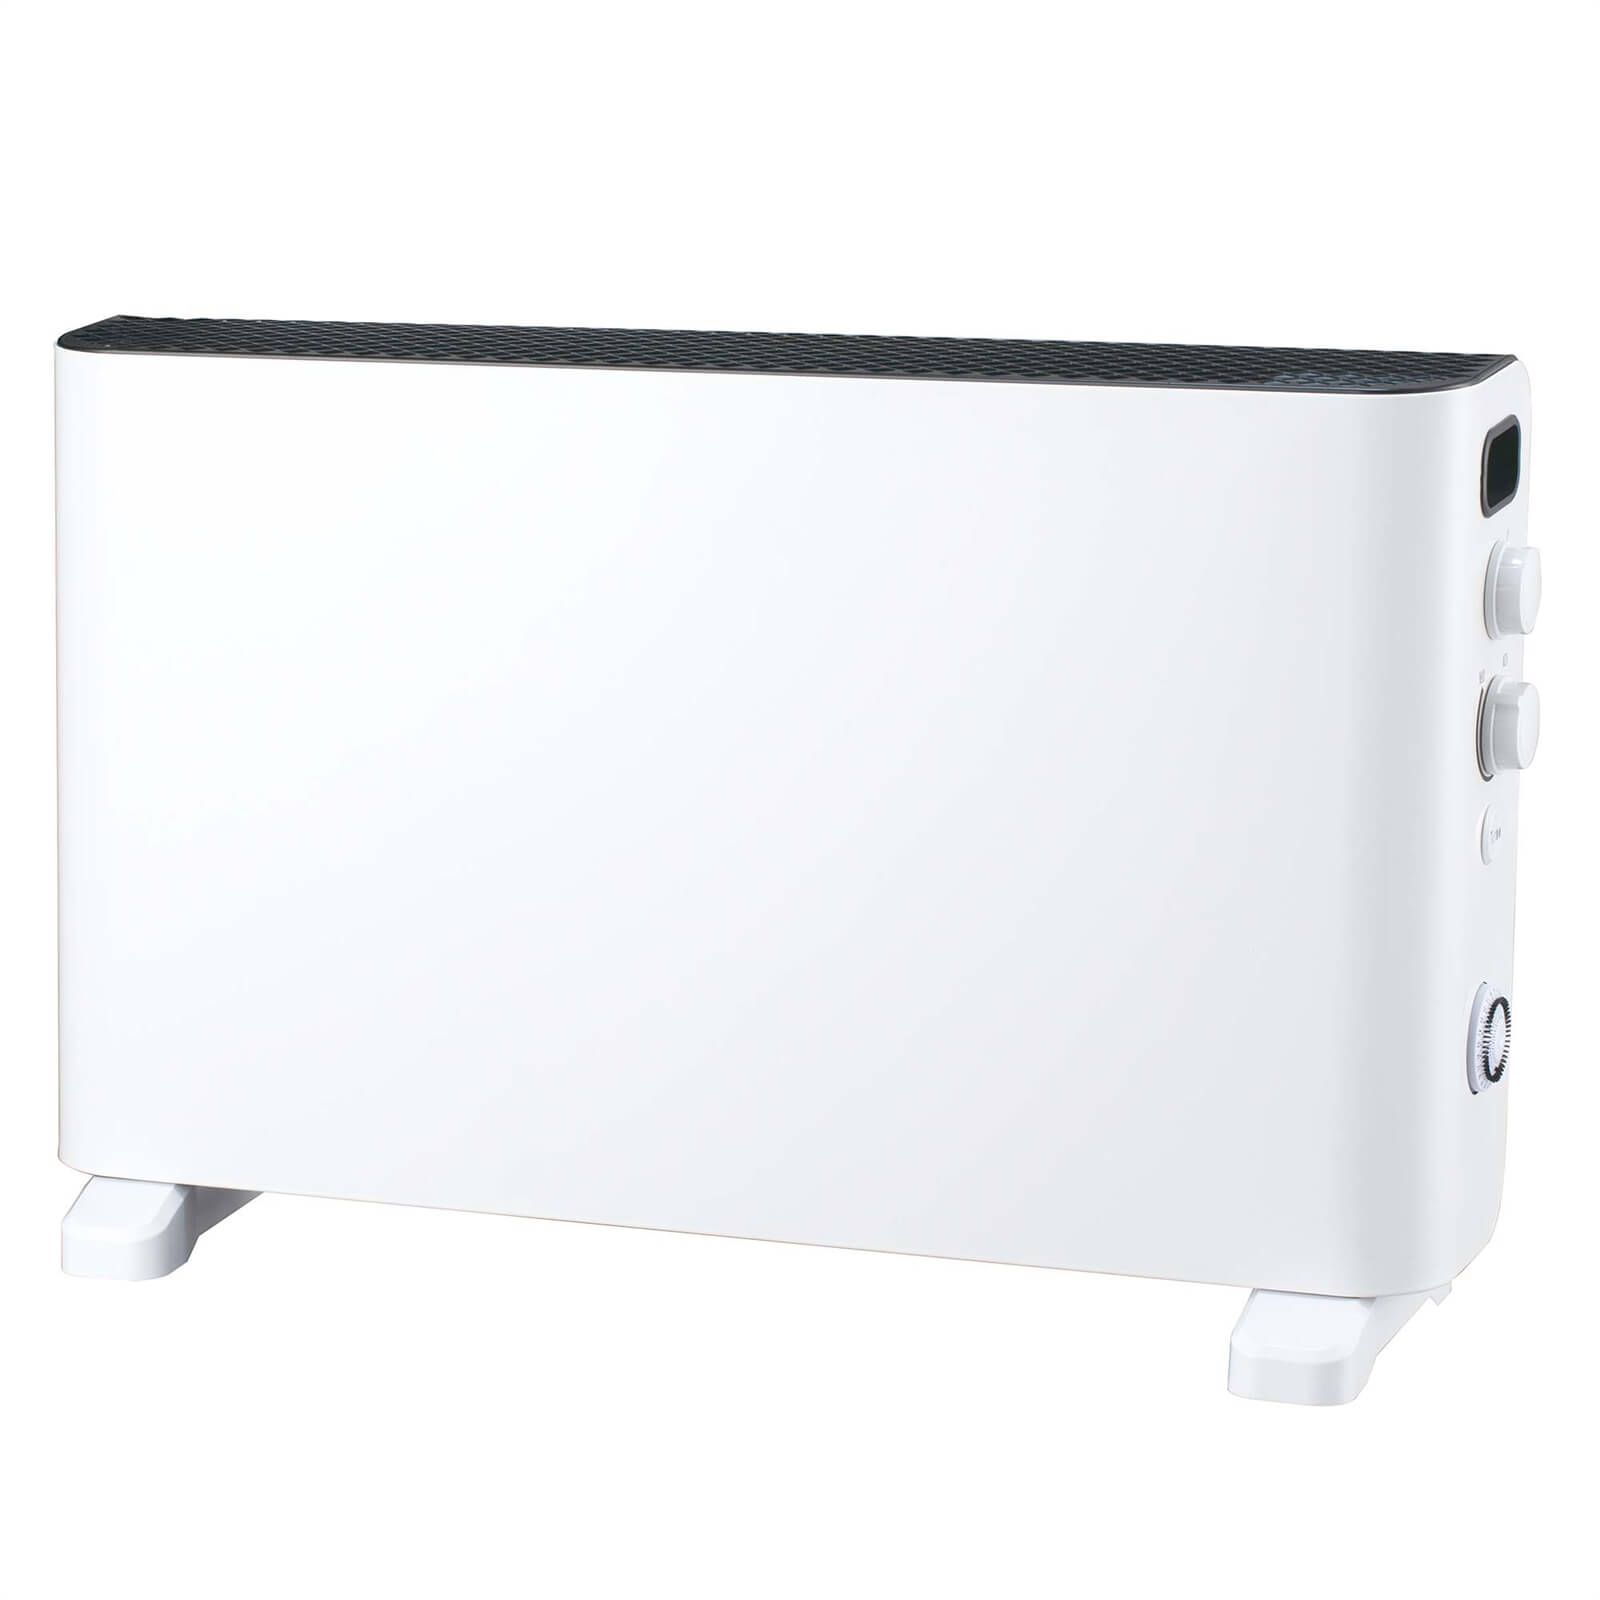 Stylec Electric Convector Heater with Timer in White - 2000W